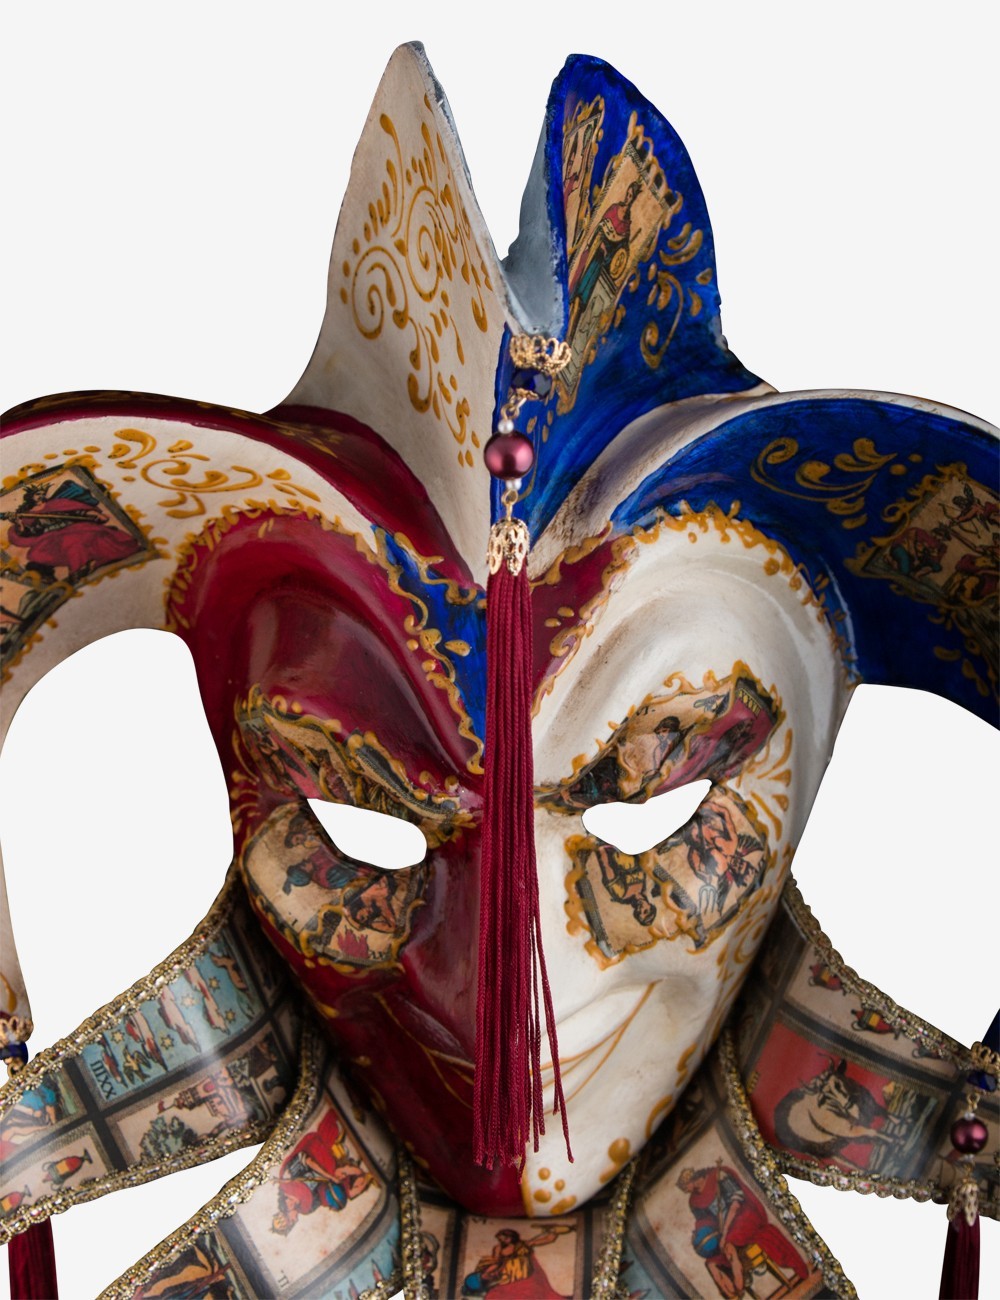 Authentic Venetian Mask for Sale - The Fool